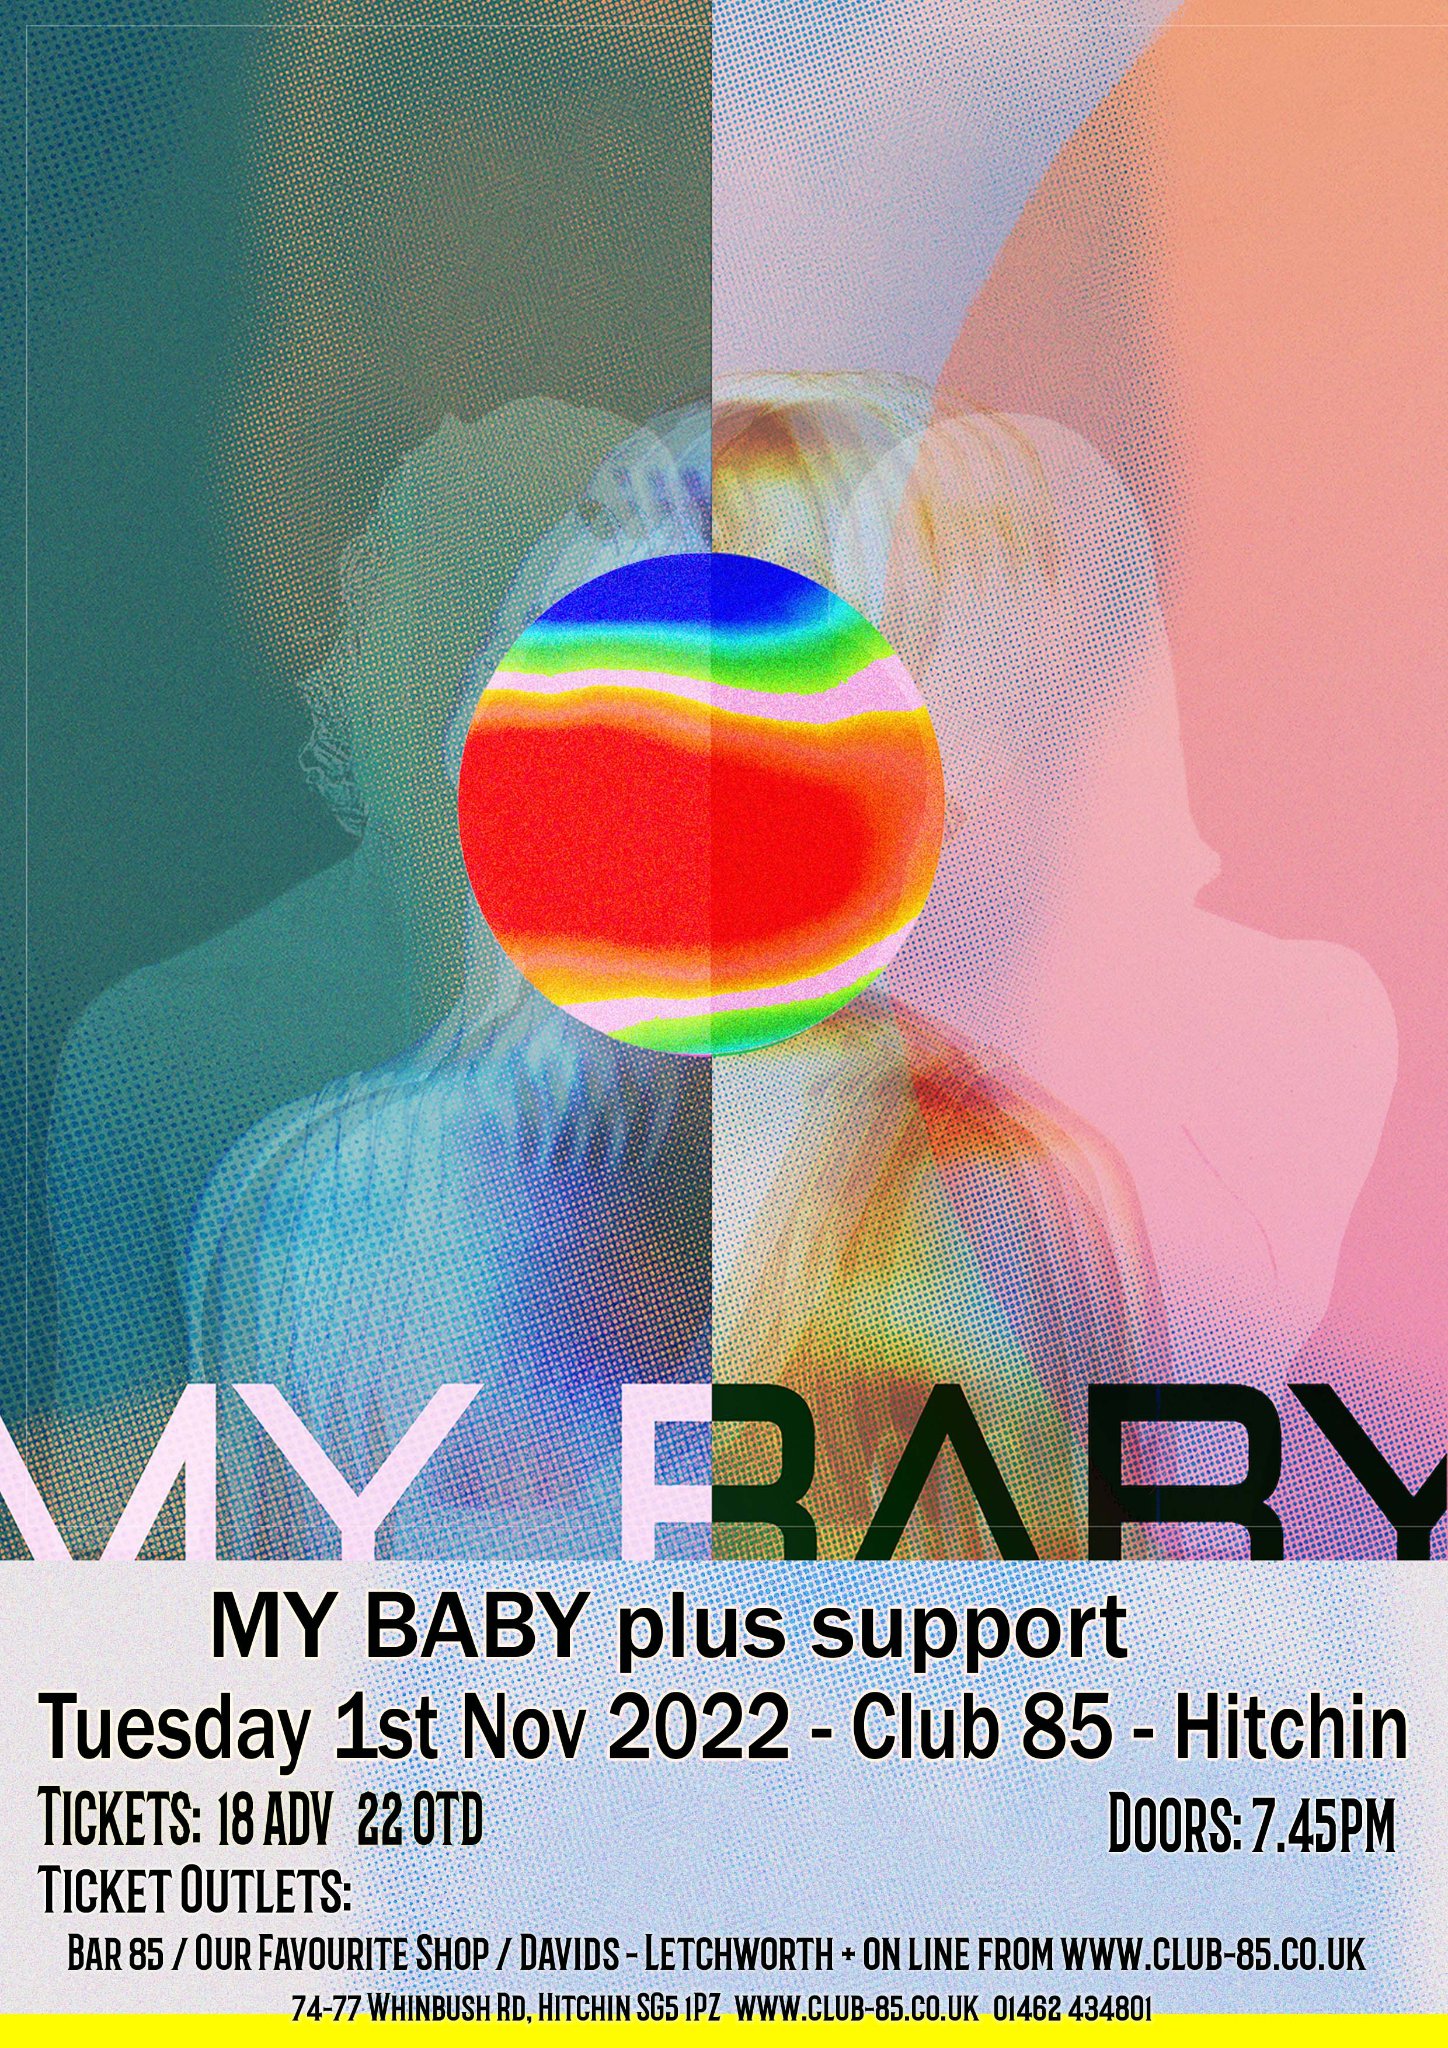 My Baby plus support – Club 85